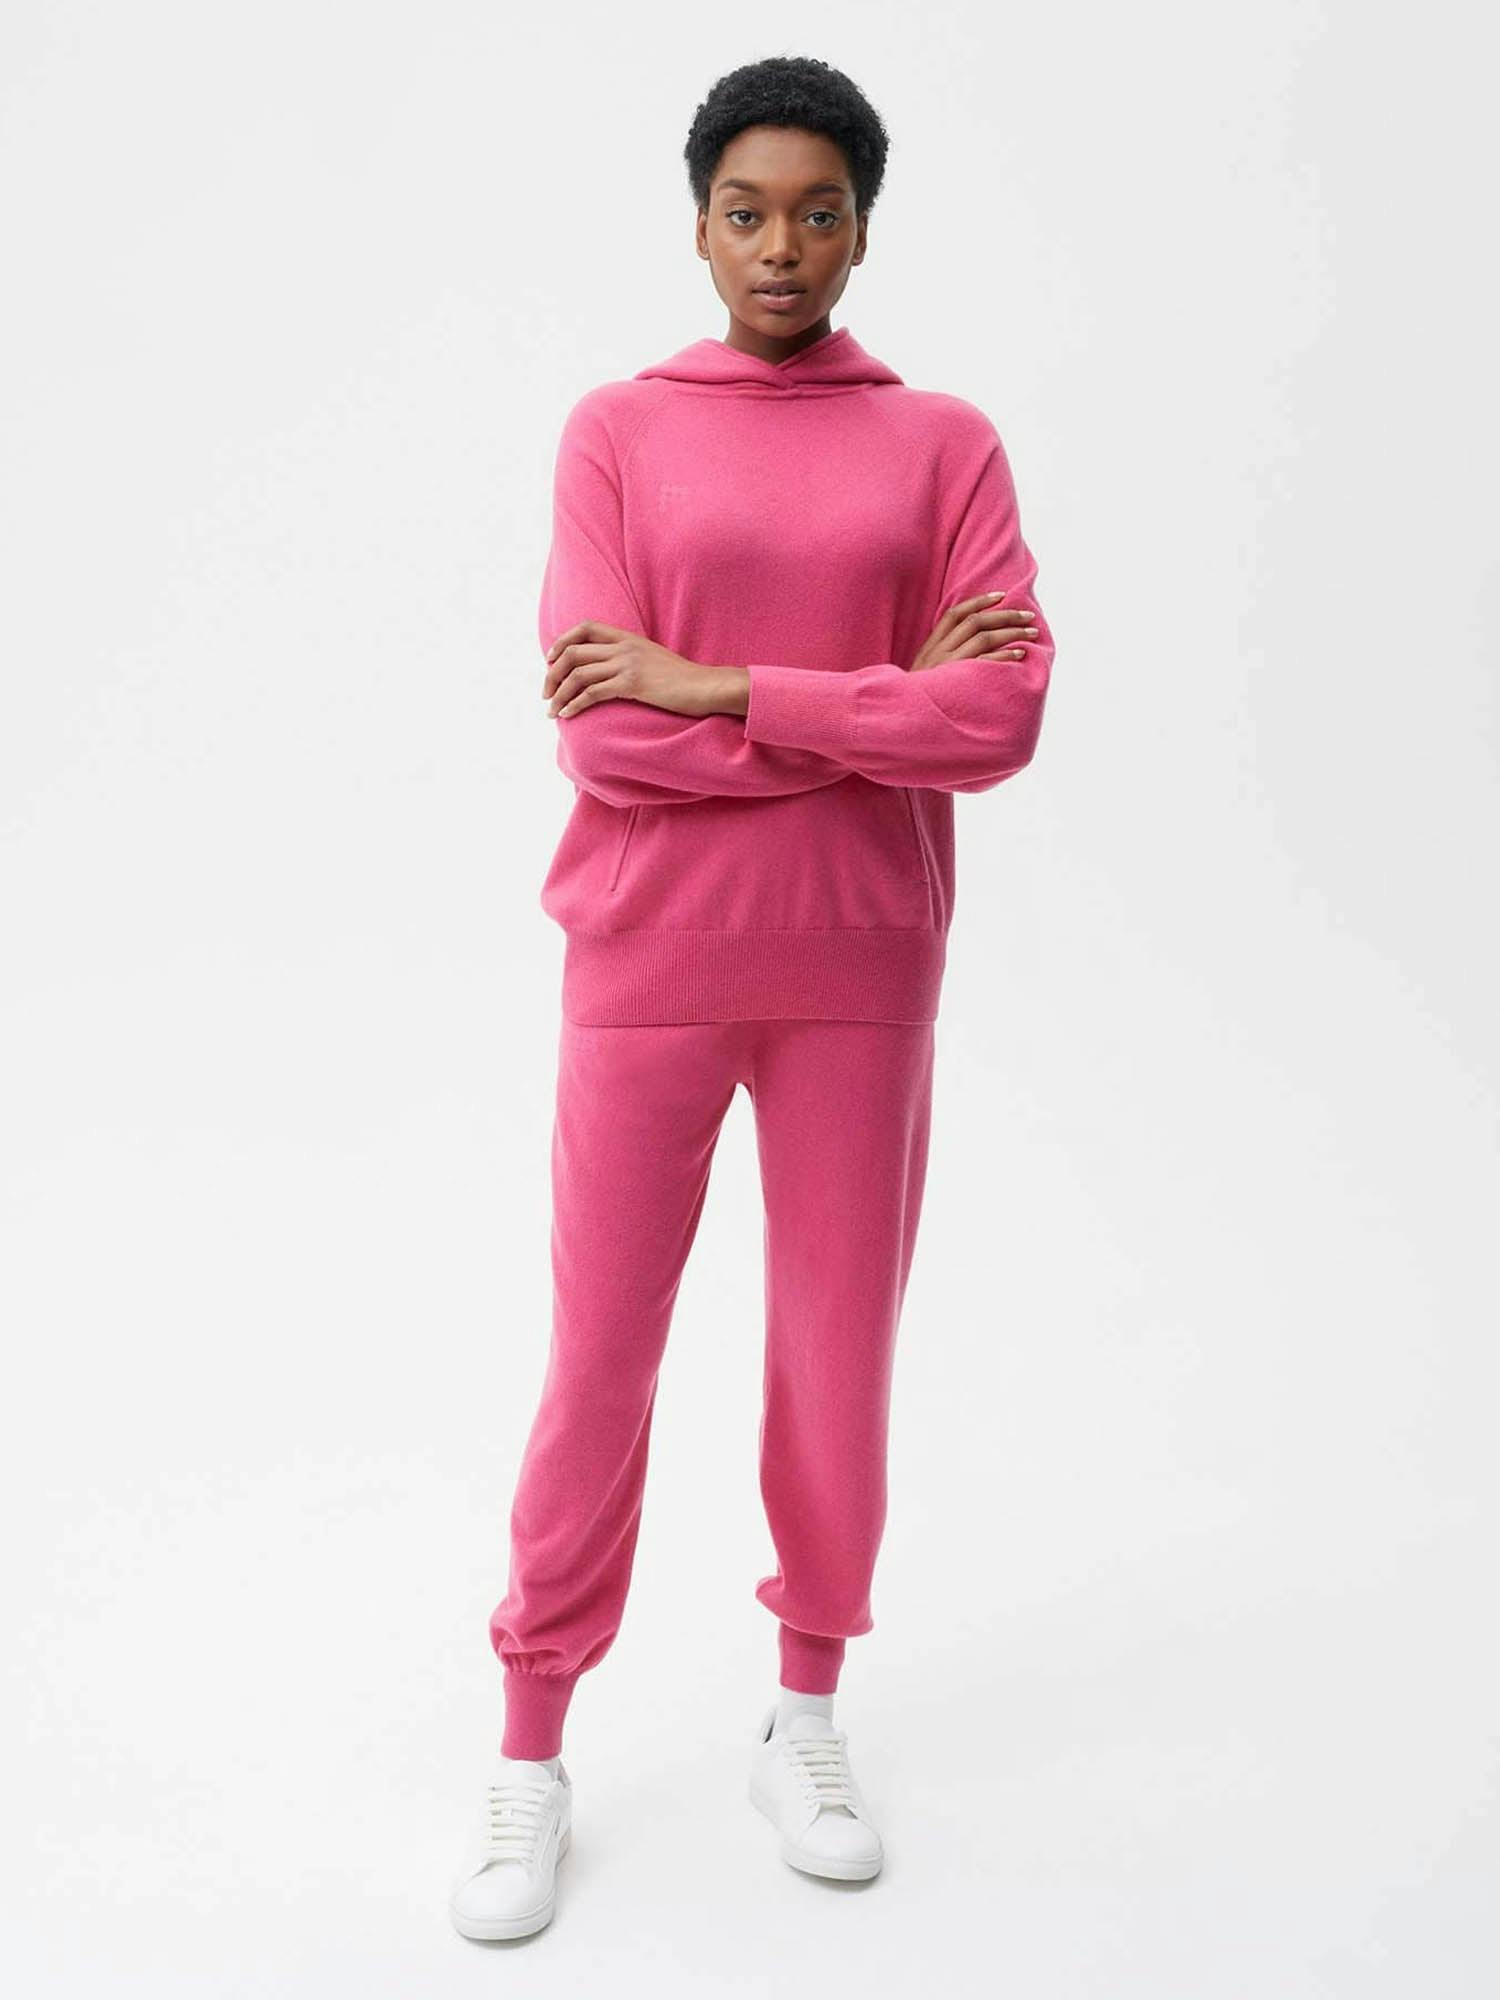 https://cdn.shopify.com/s/files/1/0035/1309/0115/products/Cashmere-Hoodie-Flamingo-Pink-Female-Model-1.jpg?v=1671726306